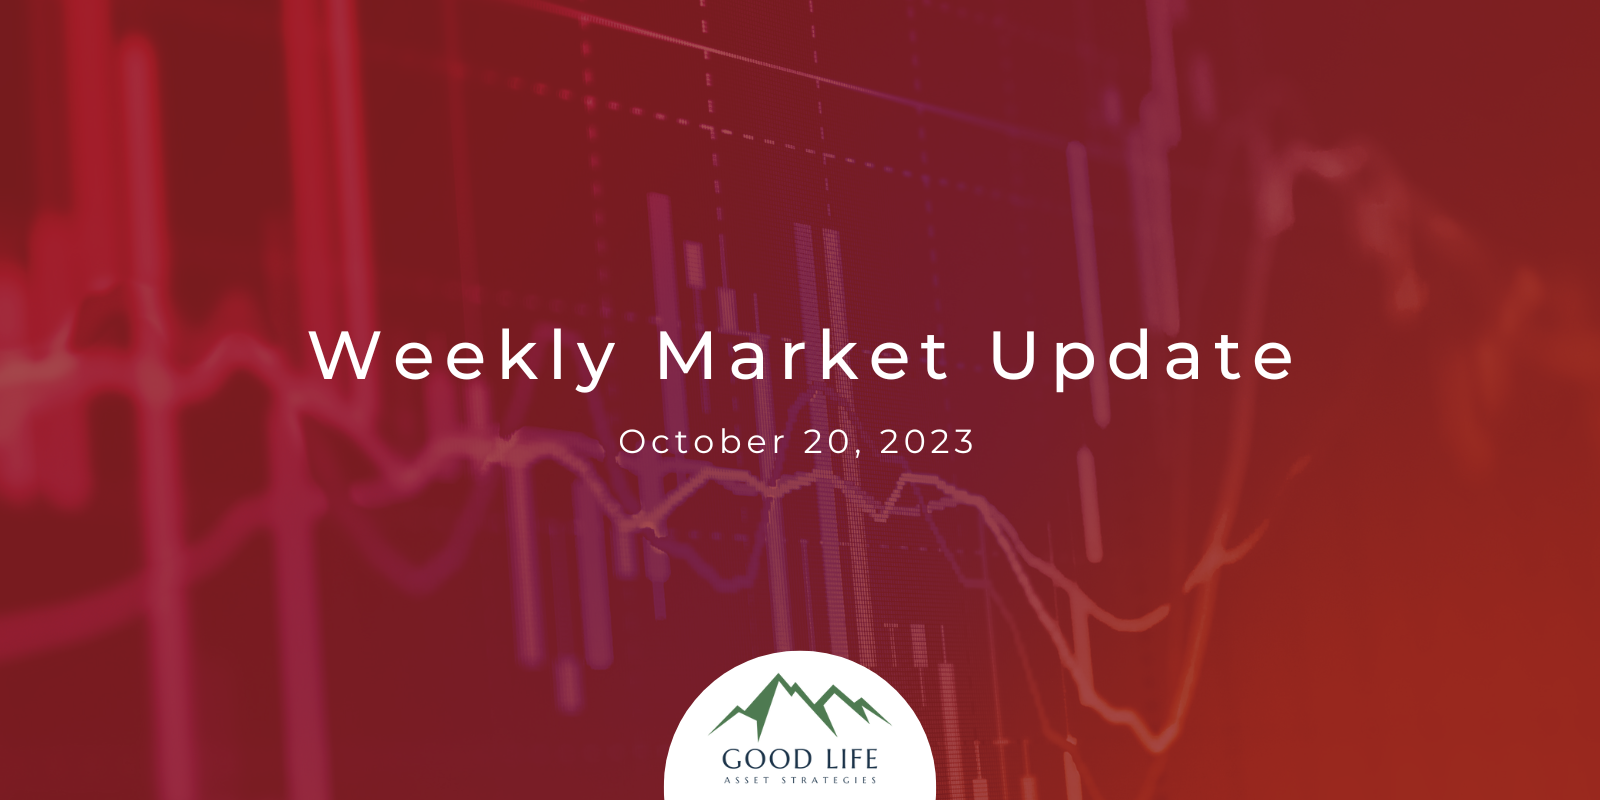 Weekly Market Update for October 20, 2023, from DeWayne Hall: Continuing to wait on the S&P today